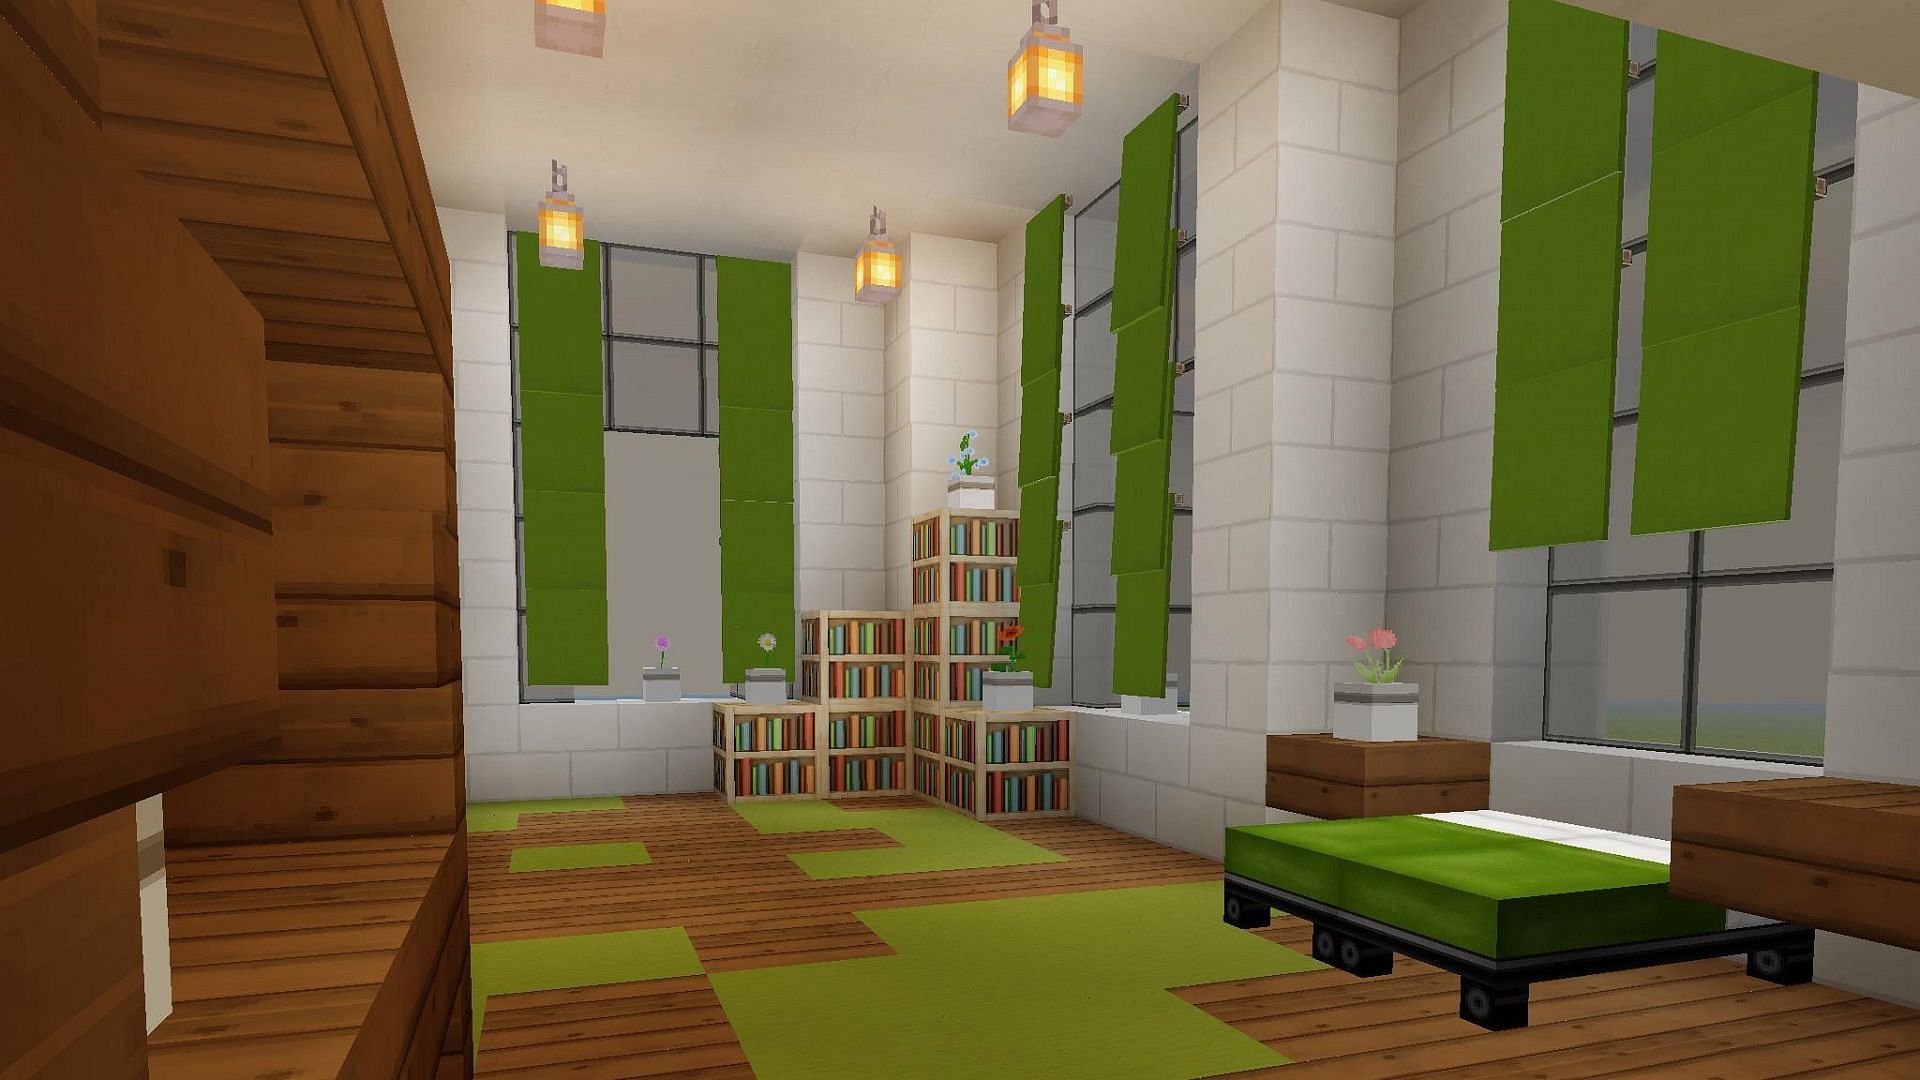 A well-made bedroom can bring together any Minecraft home or base (Image via MishaPlayz129/Reddit)